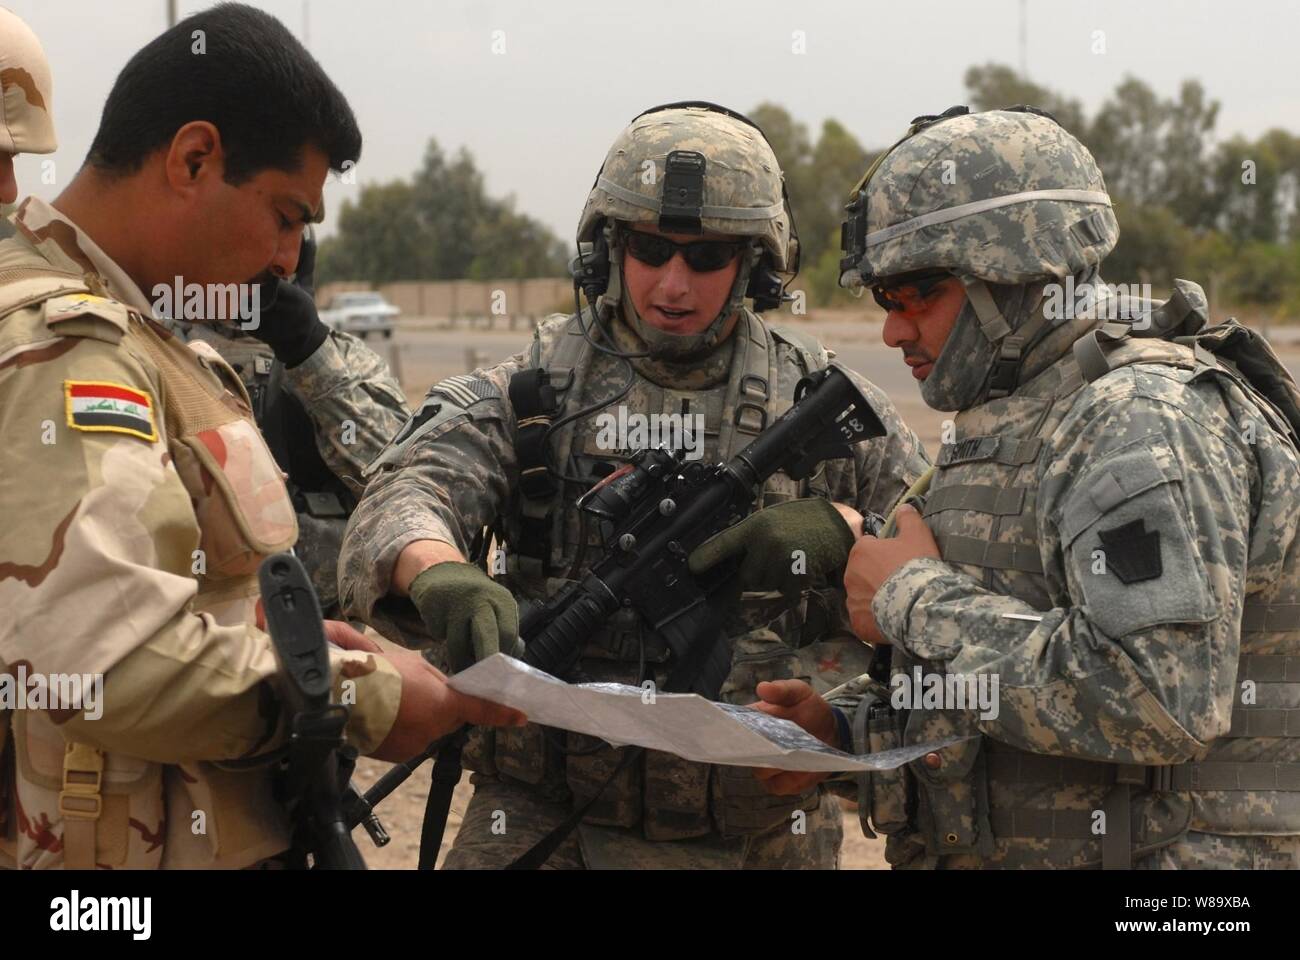 U.S. Army 1st Lt. Andrew Dacey from the 2nd Brigade, 1st Infantry Division reviews security checkpoints with Iraqi soldiers in the city of Abu Ghraib, Iraq, on March 31, 2009. Stock Photo